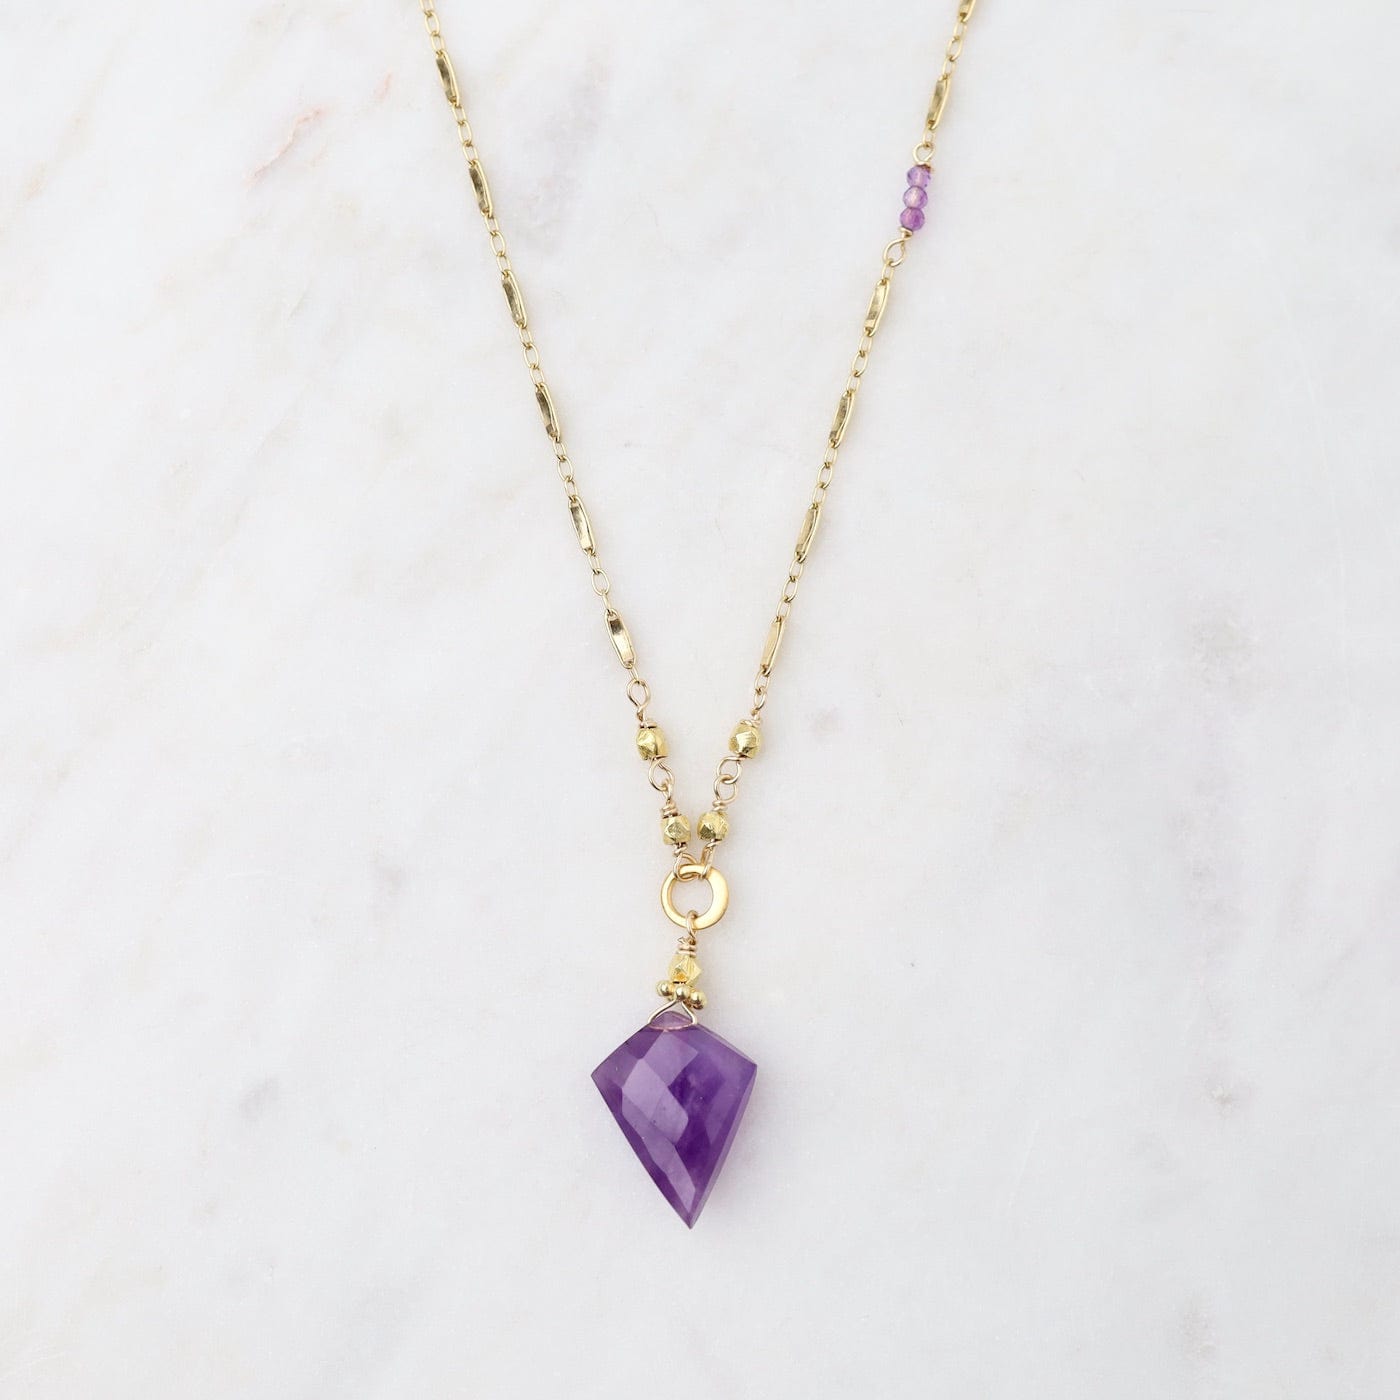 NKL-GF Simple Amethyst Spade on Gold Filled Chain Necklace